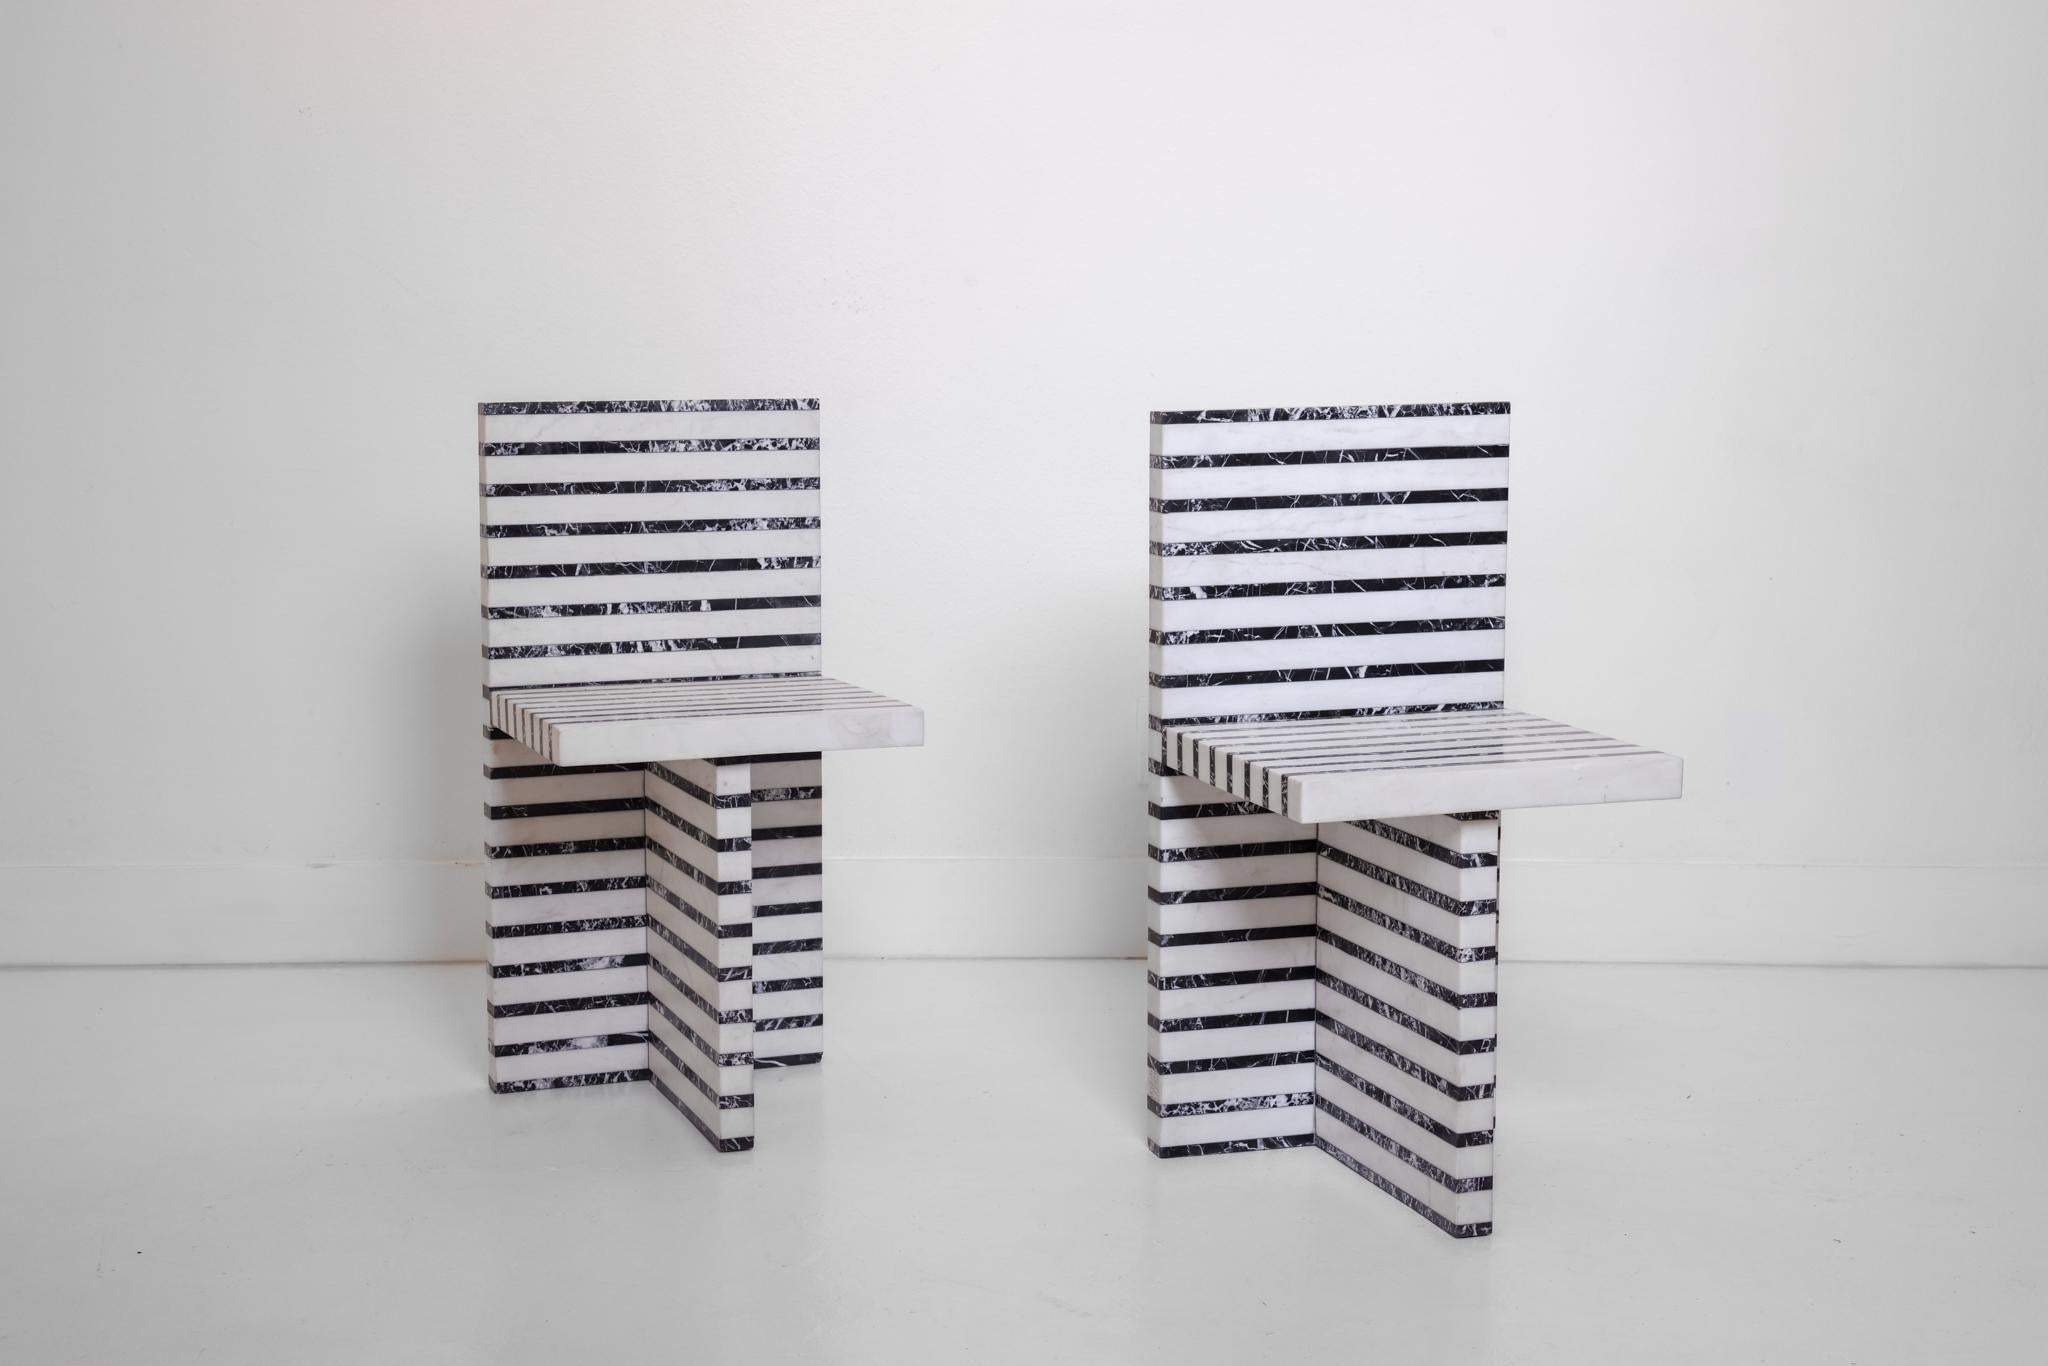 American Pair of Lineage Chairs by Kelly Wearstler